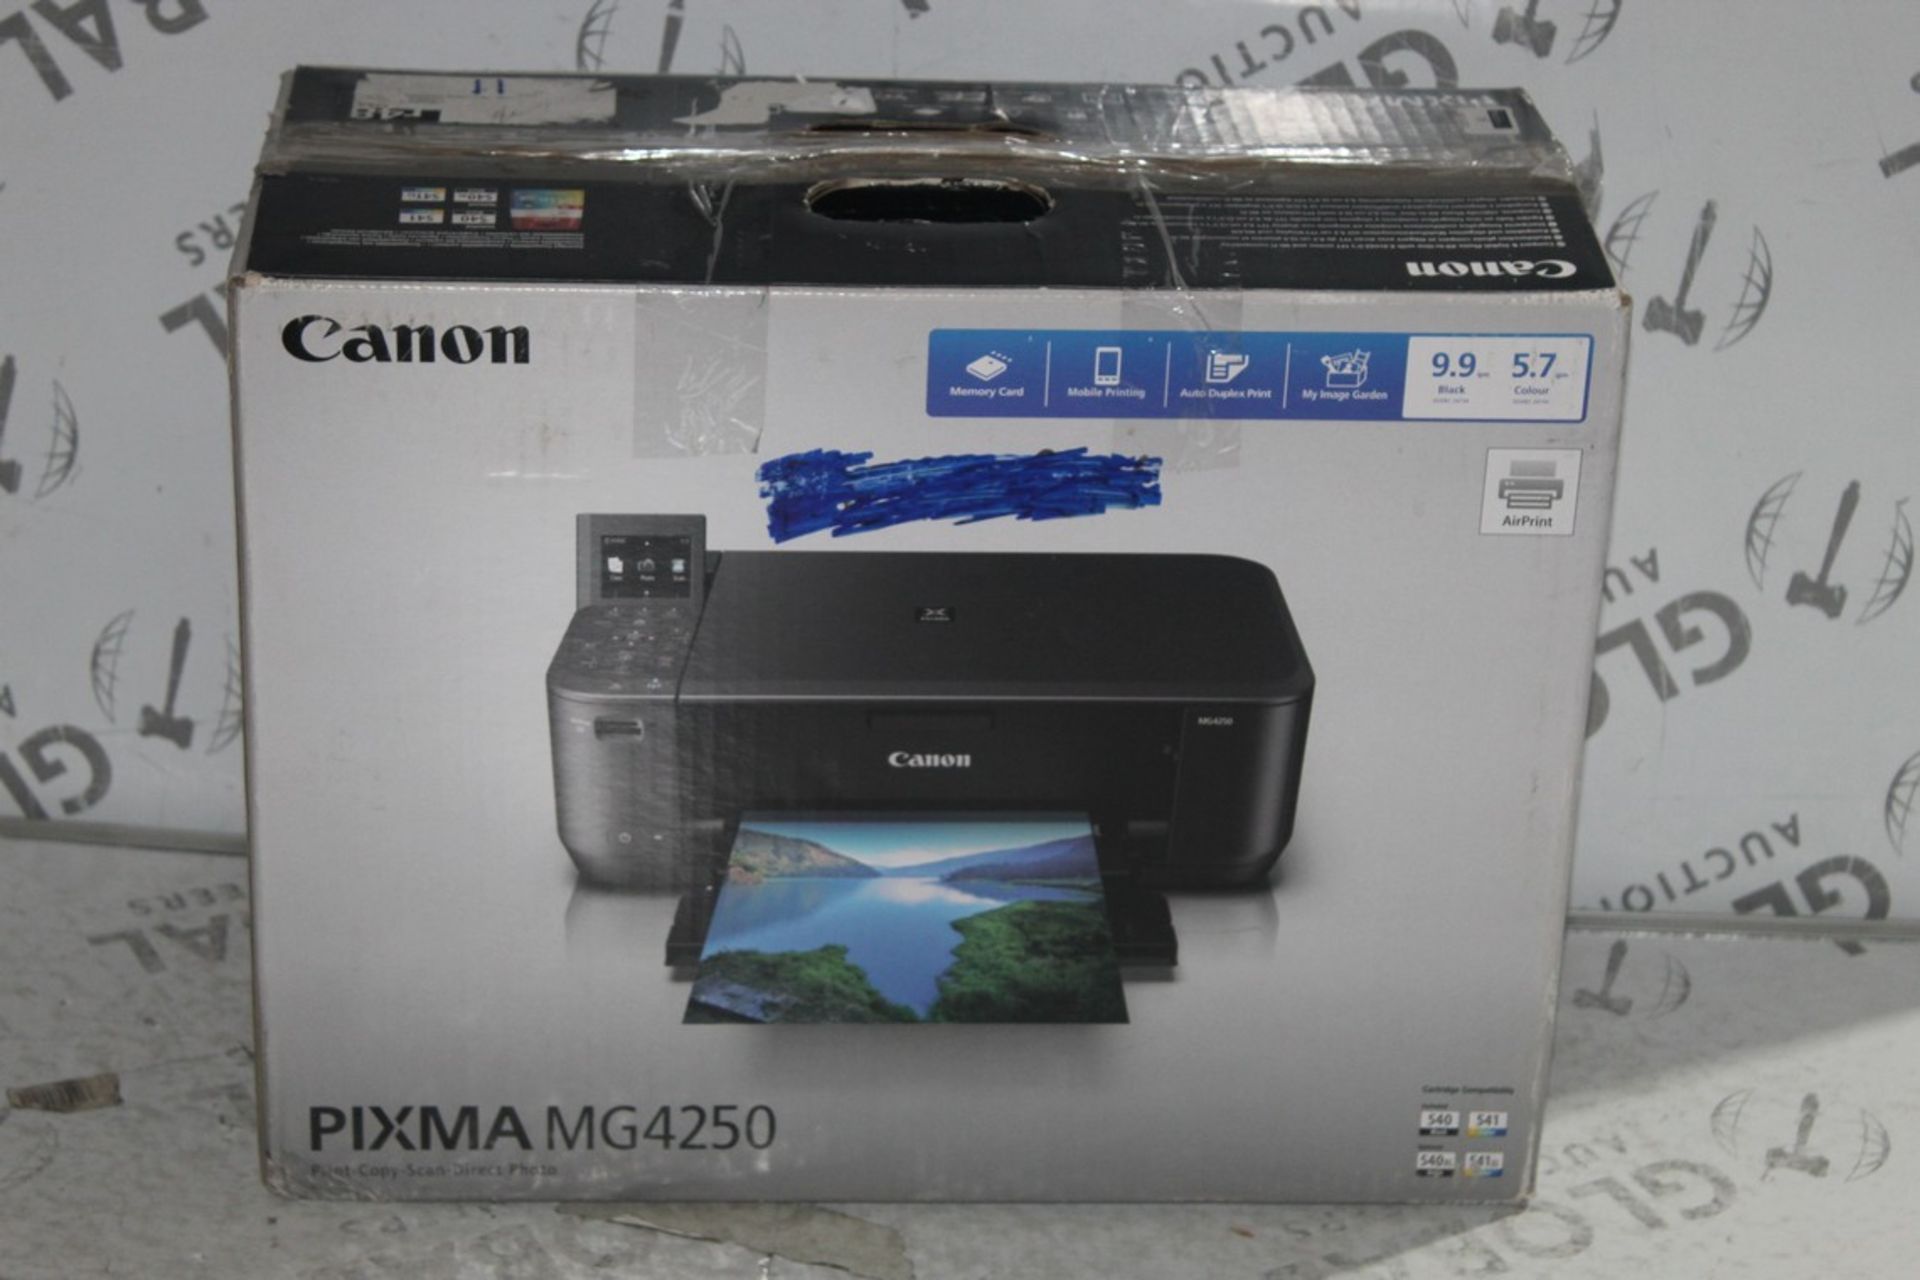 Boxed Canon Pixma MG4250 All In One Printer Scanner Copier RRP £50 (Public Viewing and Appraisals